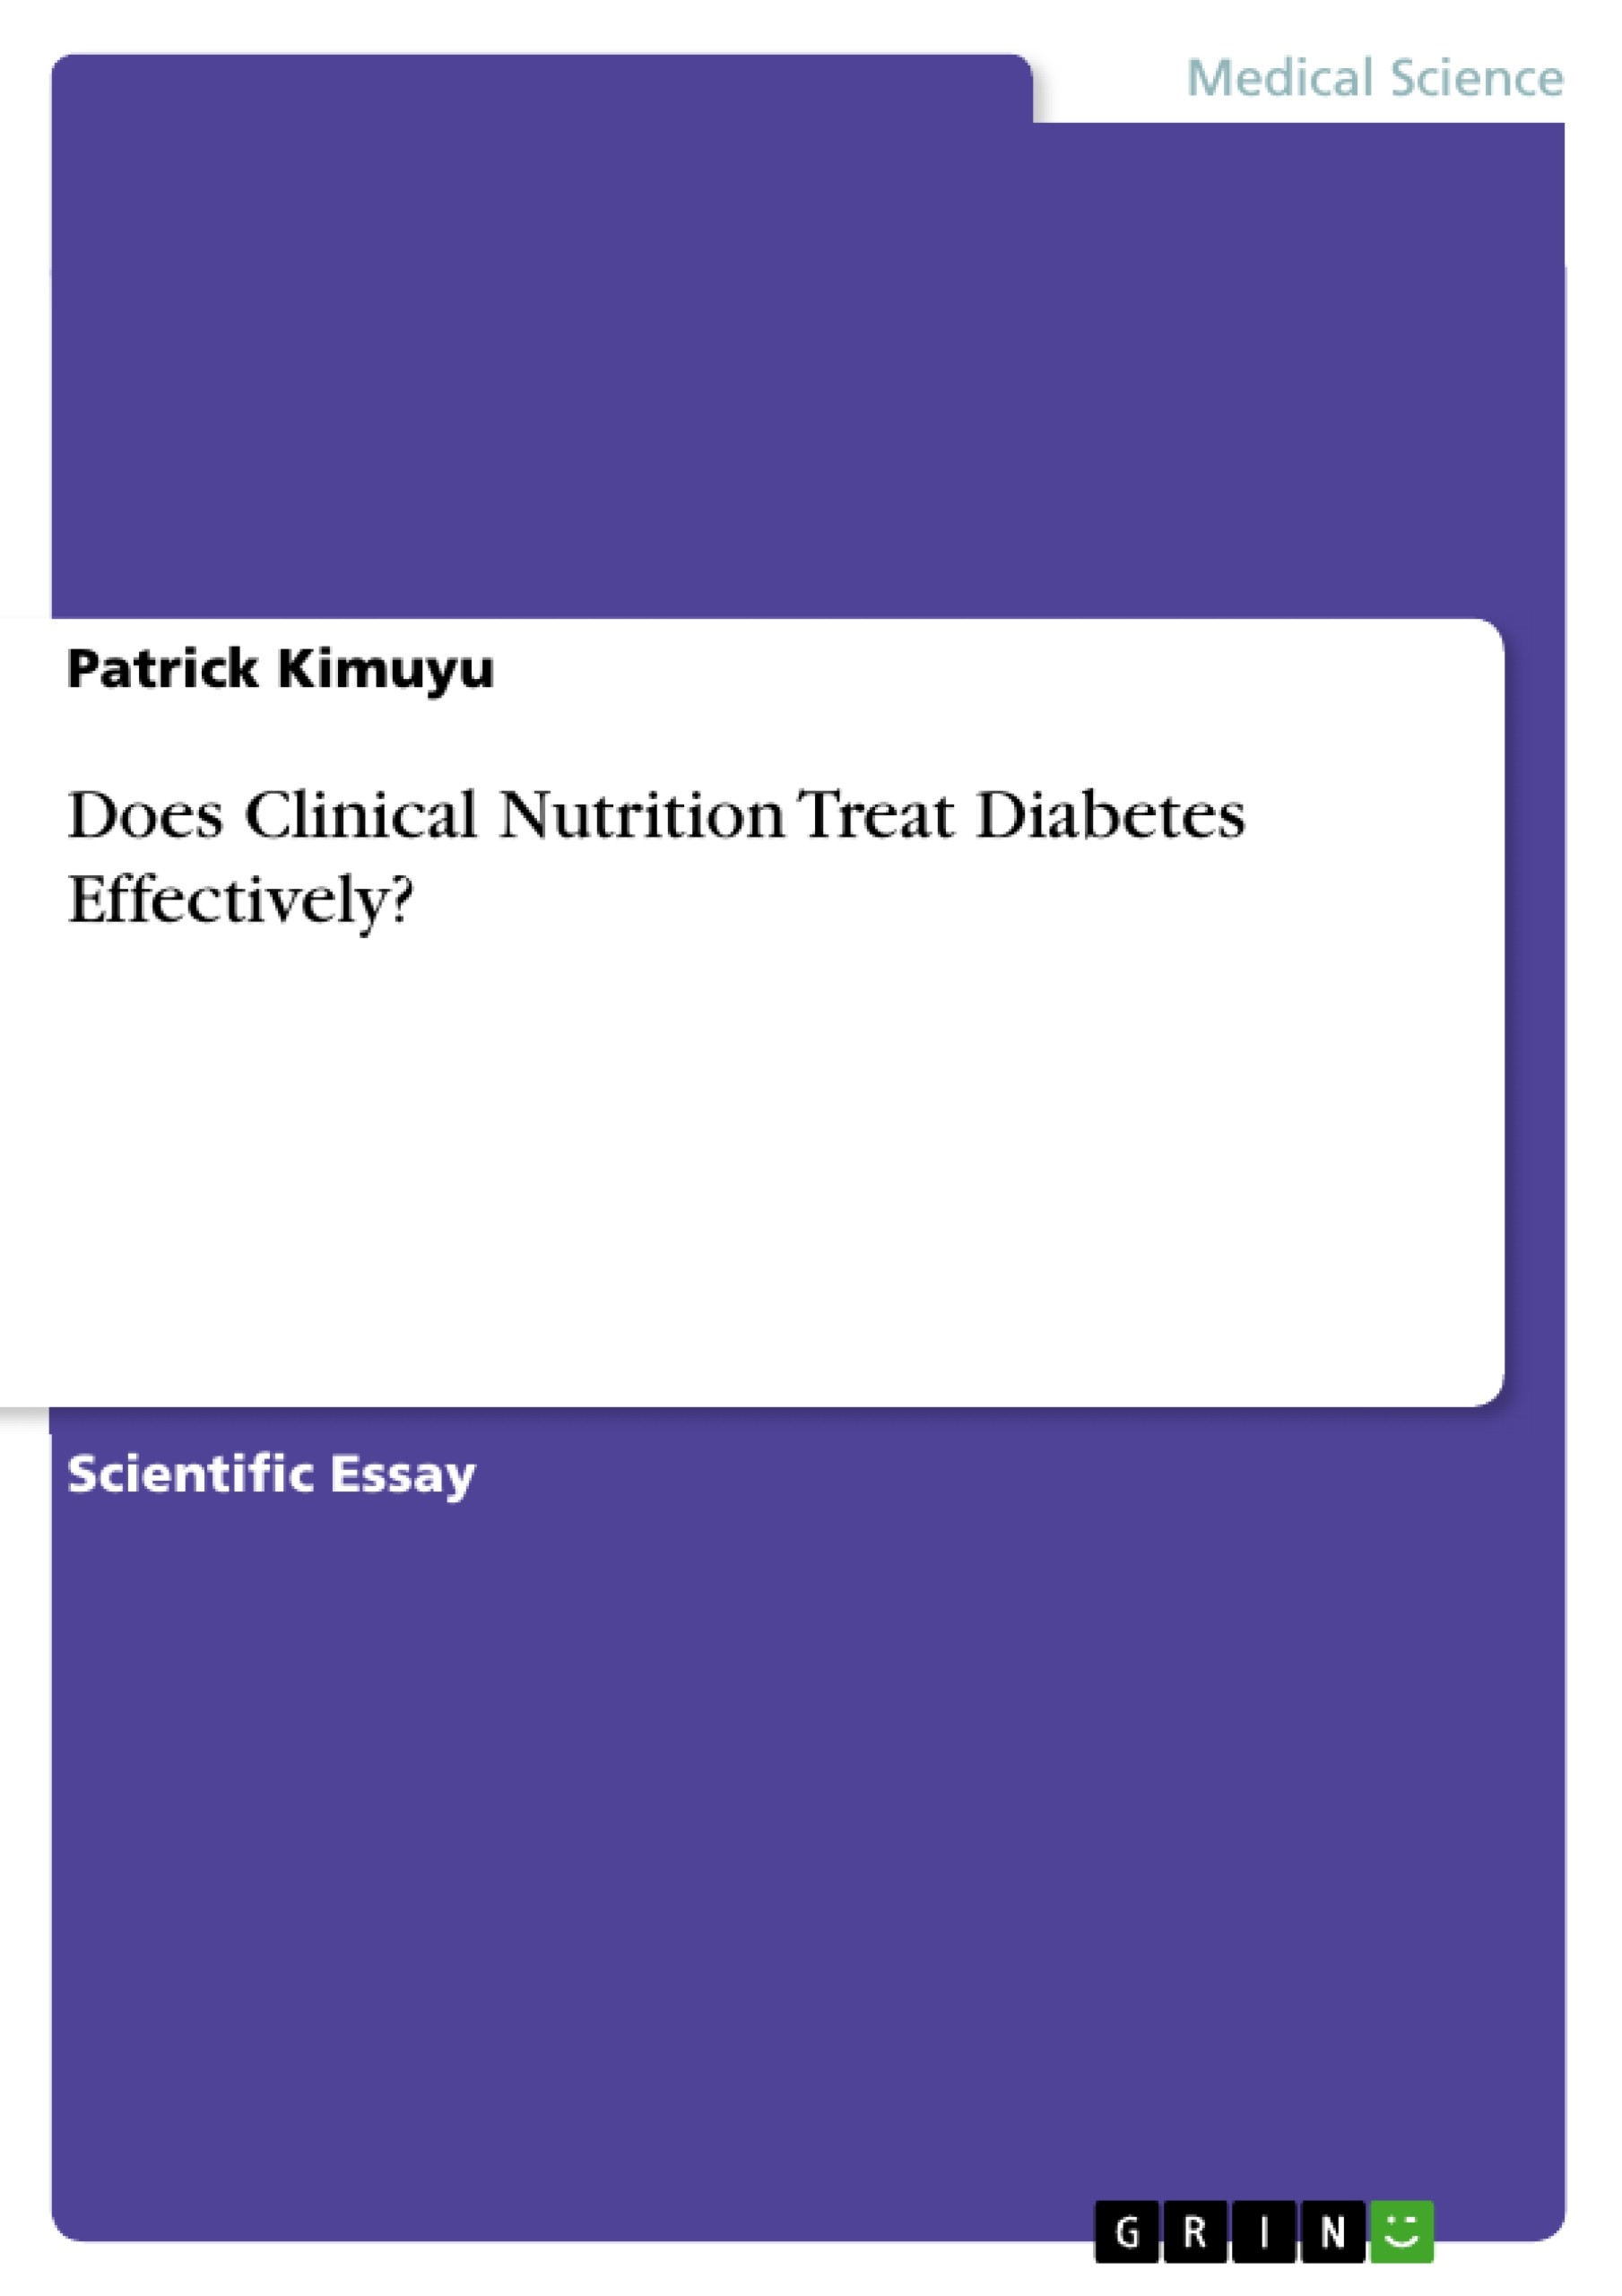 Does Clinical Nutrition Treat Diabetes Effectively?